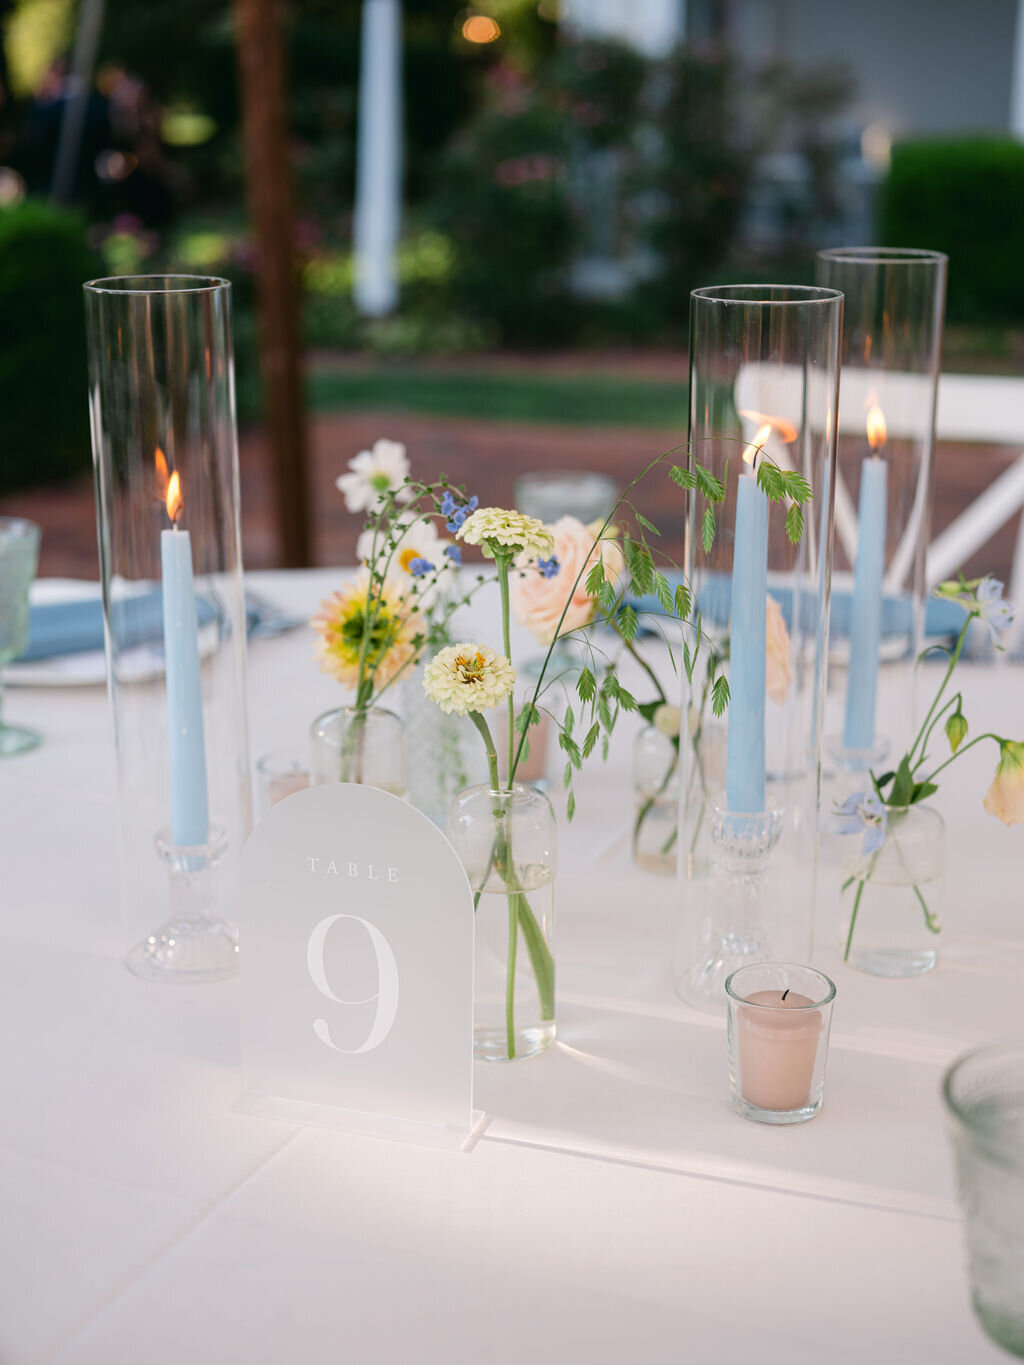 Guest table with accent florals such as white zinnias, white cosmos and lisianthus in bud vases alongside blue taper candles.